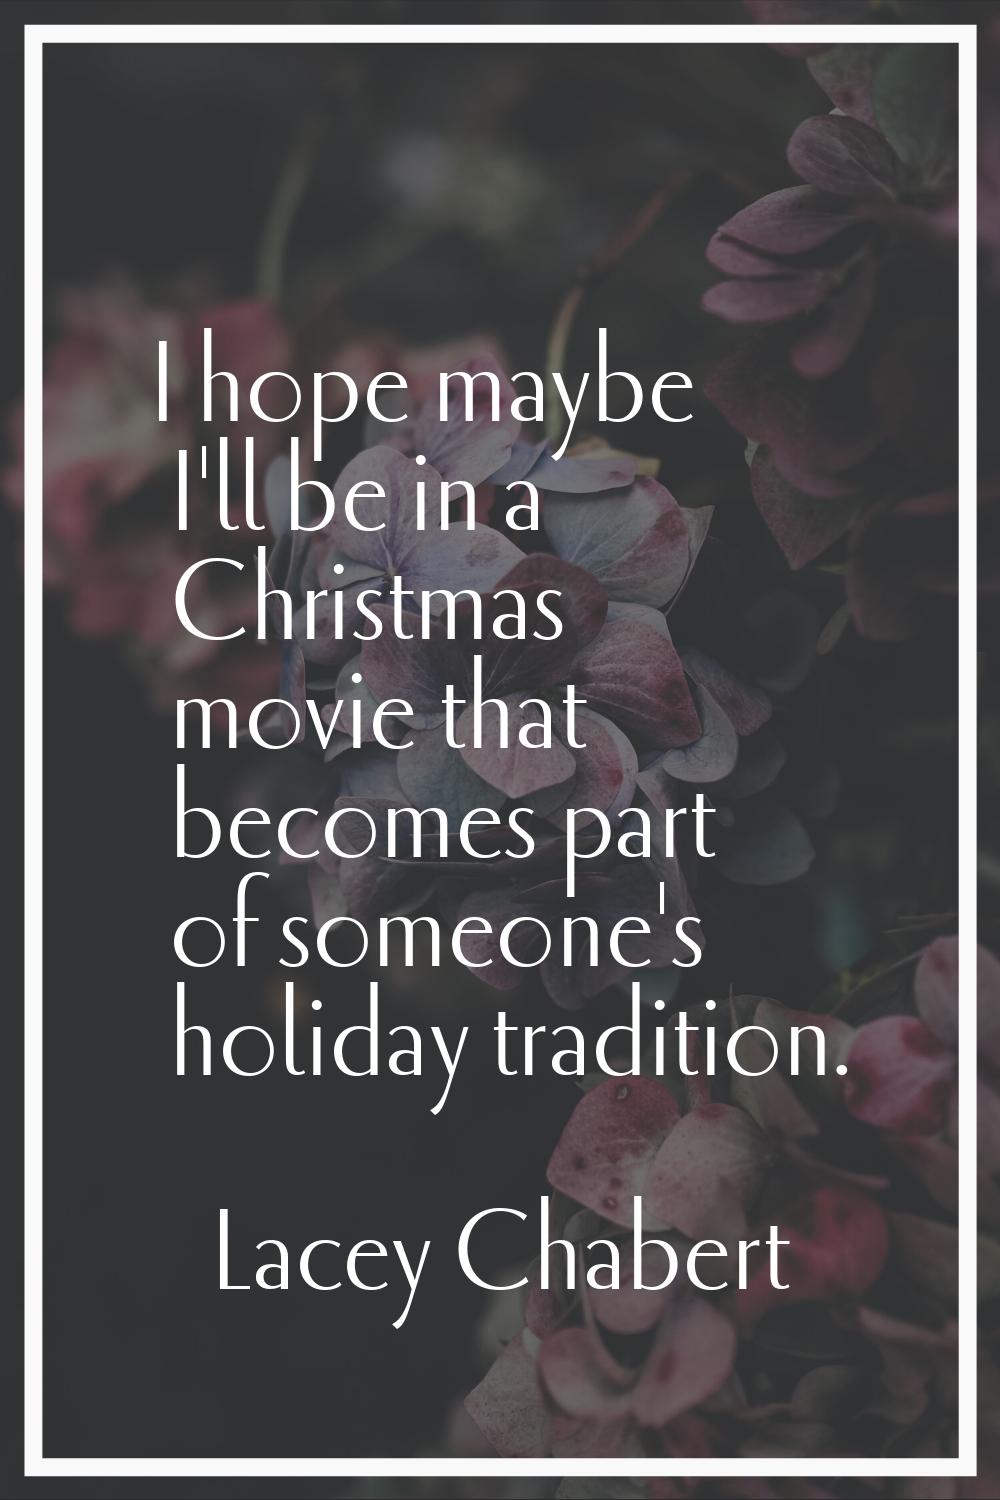 I hope maybe I'll be in a Christmas movie that becomes part of someone's holiday tradition.